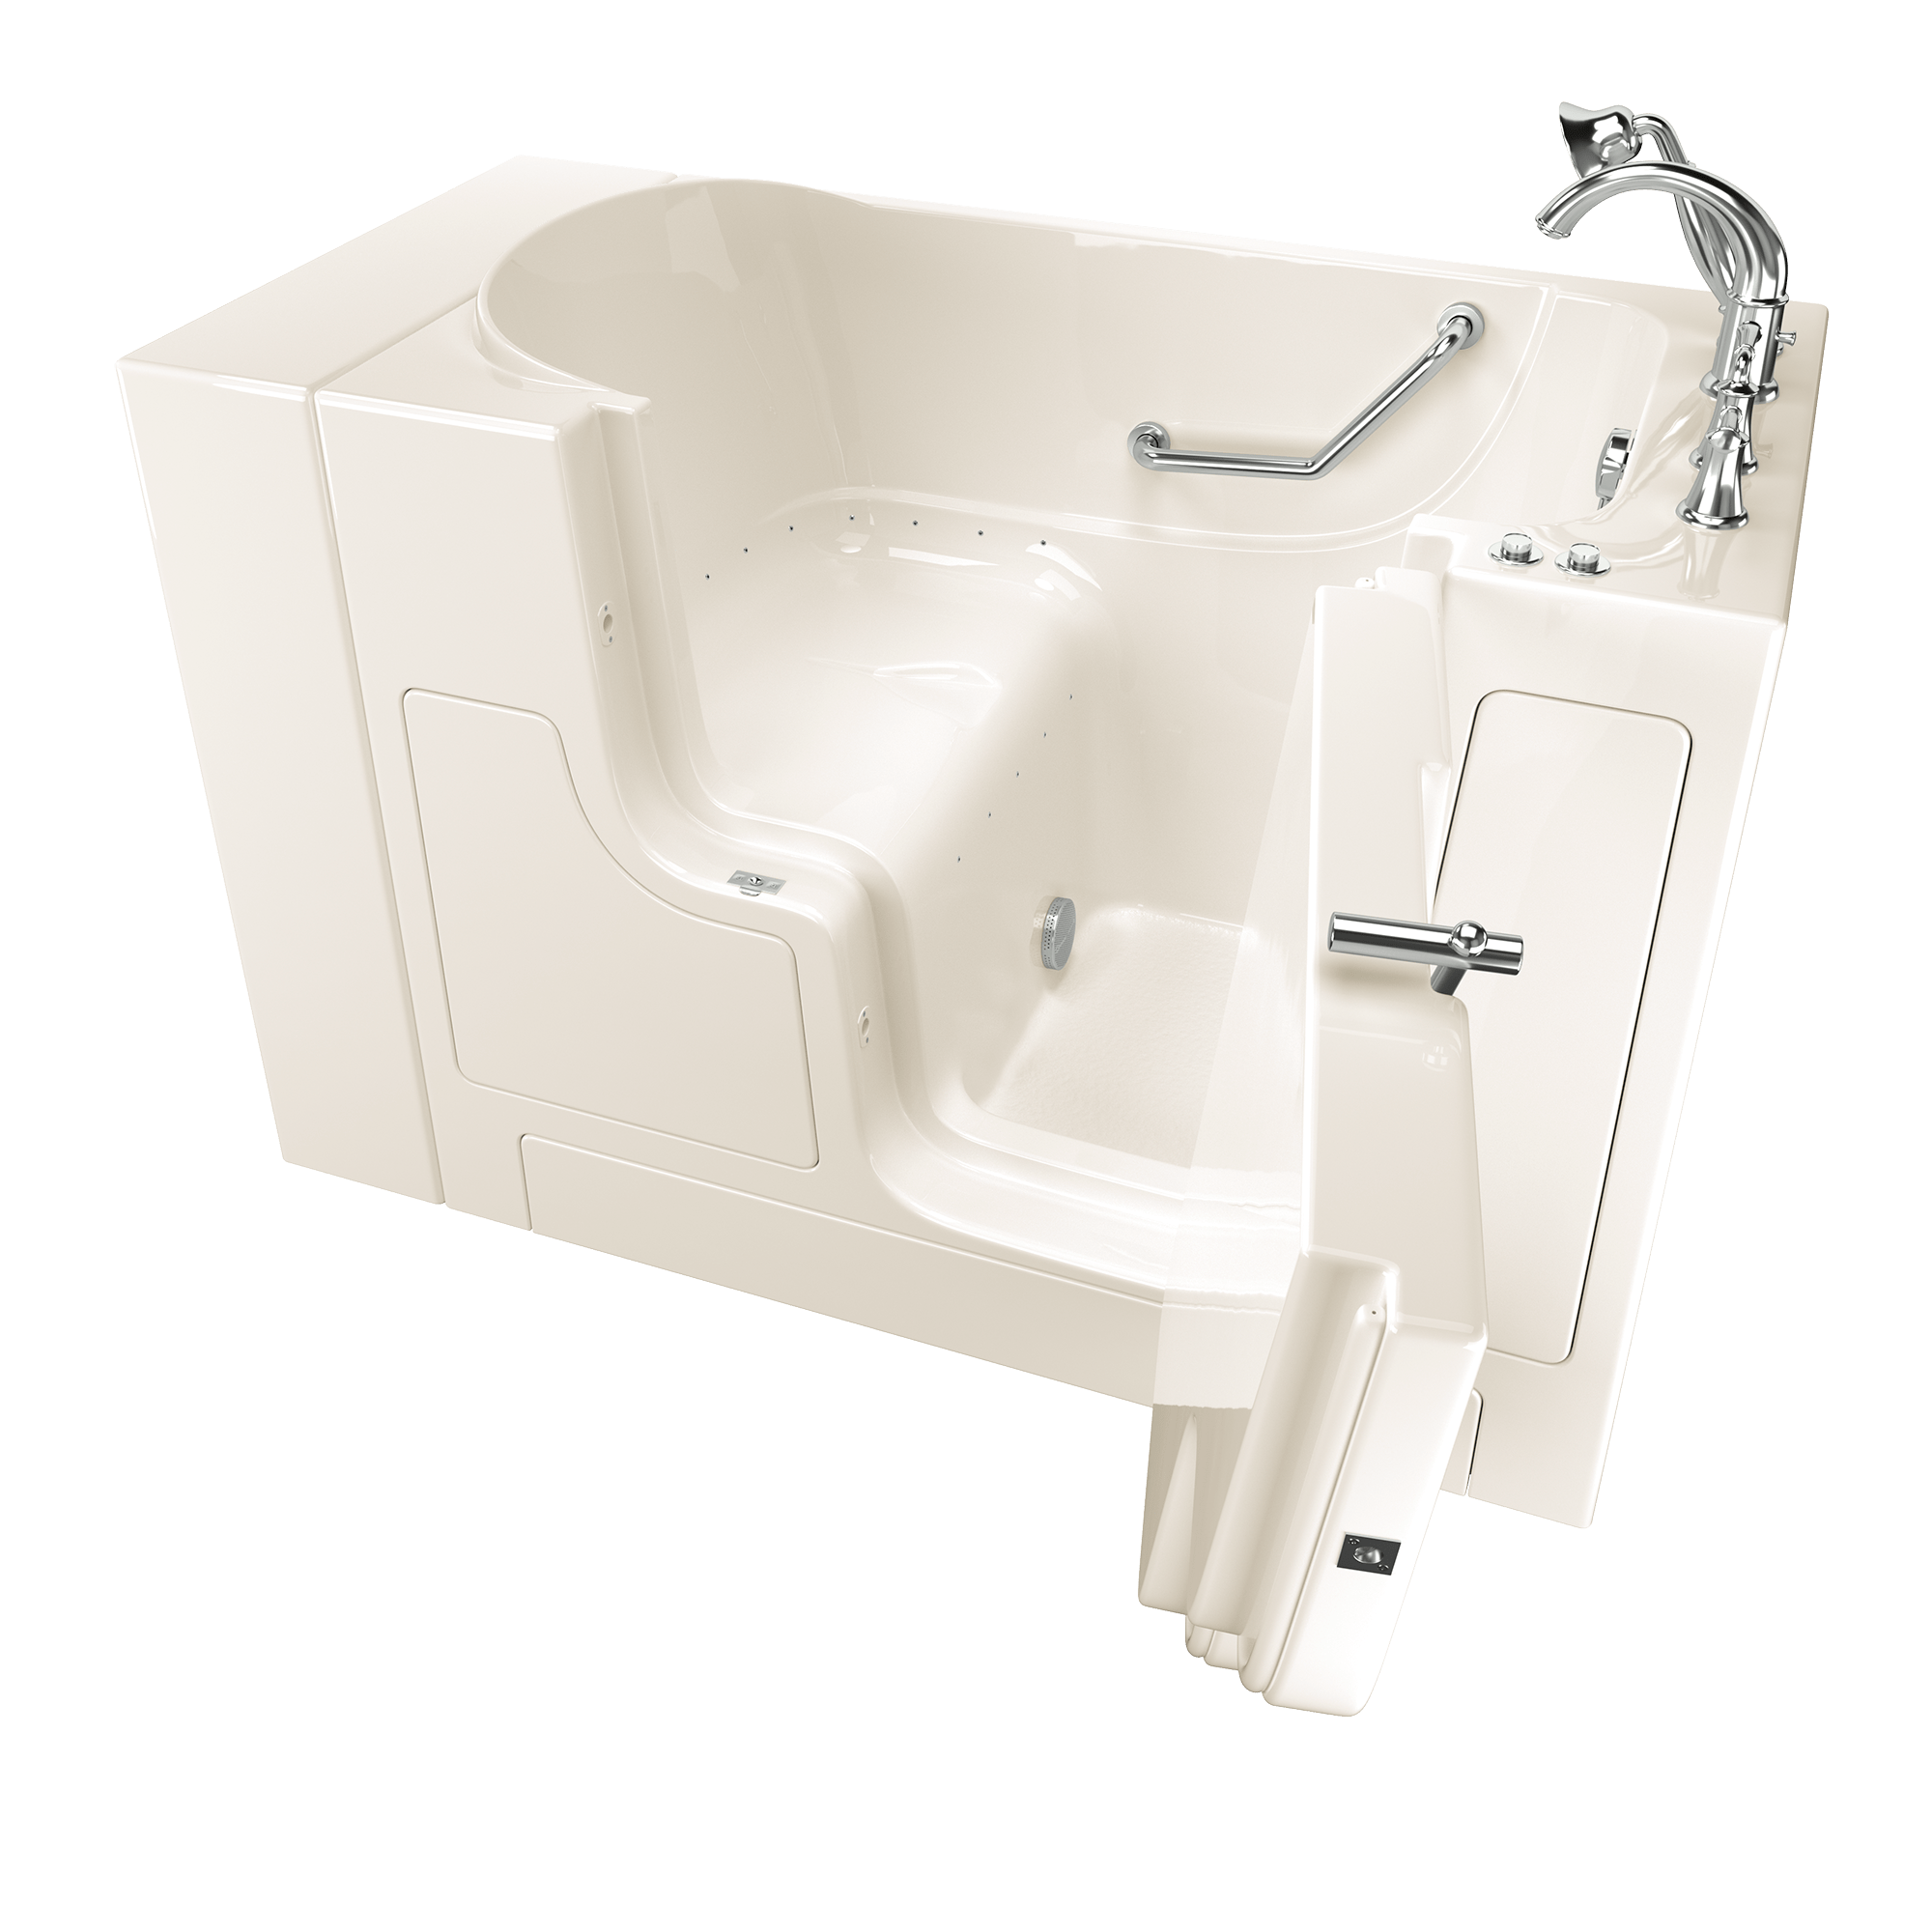 Gelcoat Value Series 30 x 52 -Inch Walk-in Tub With Air Spa System - Right-Hand Drain With Faucet